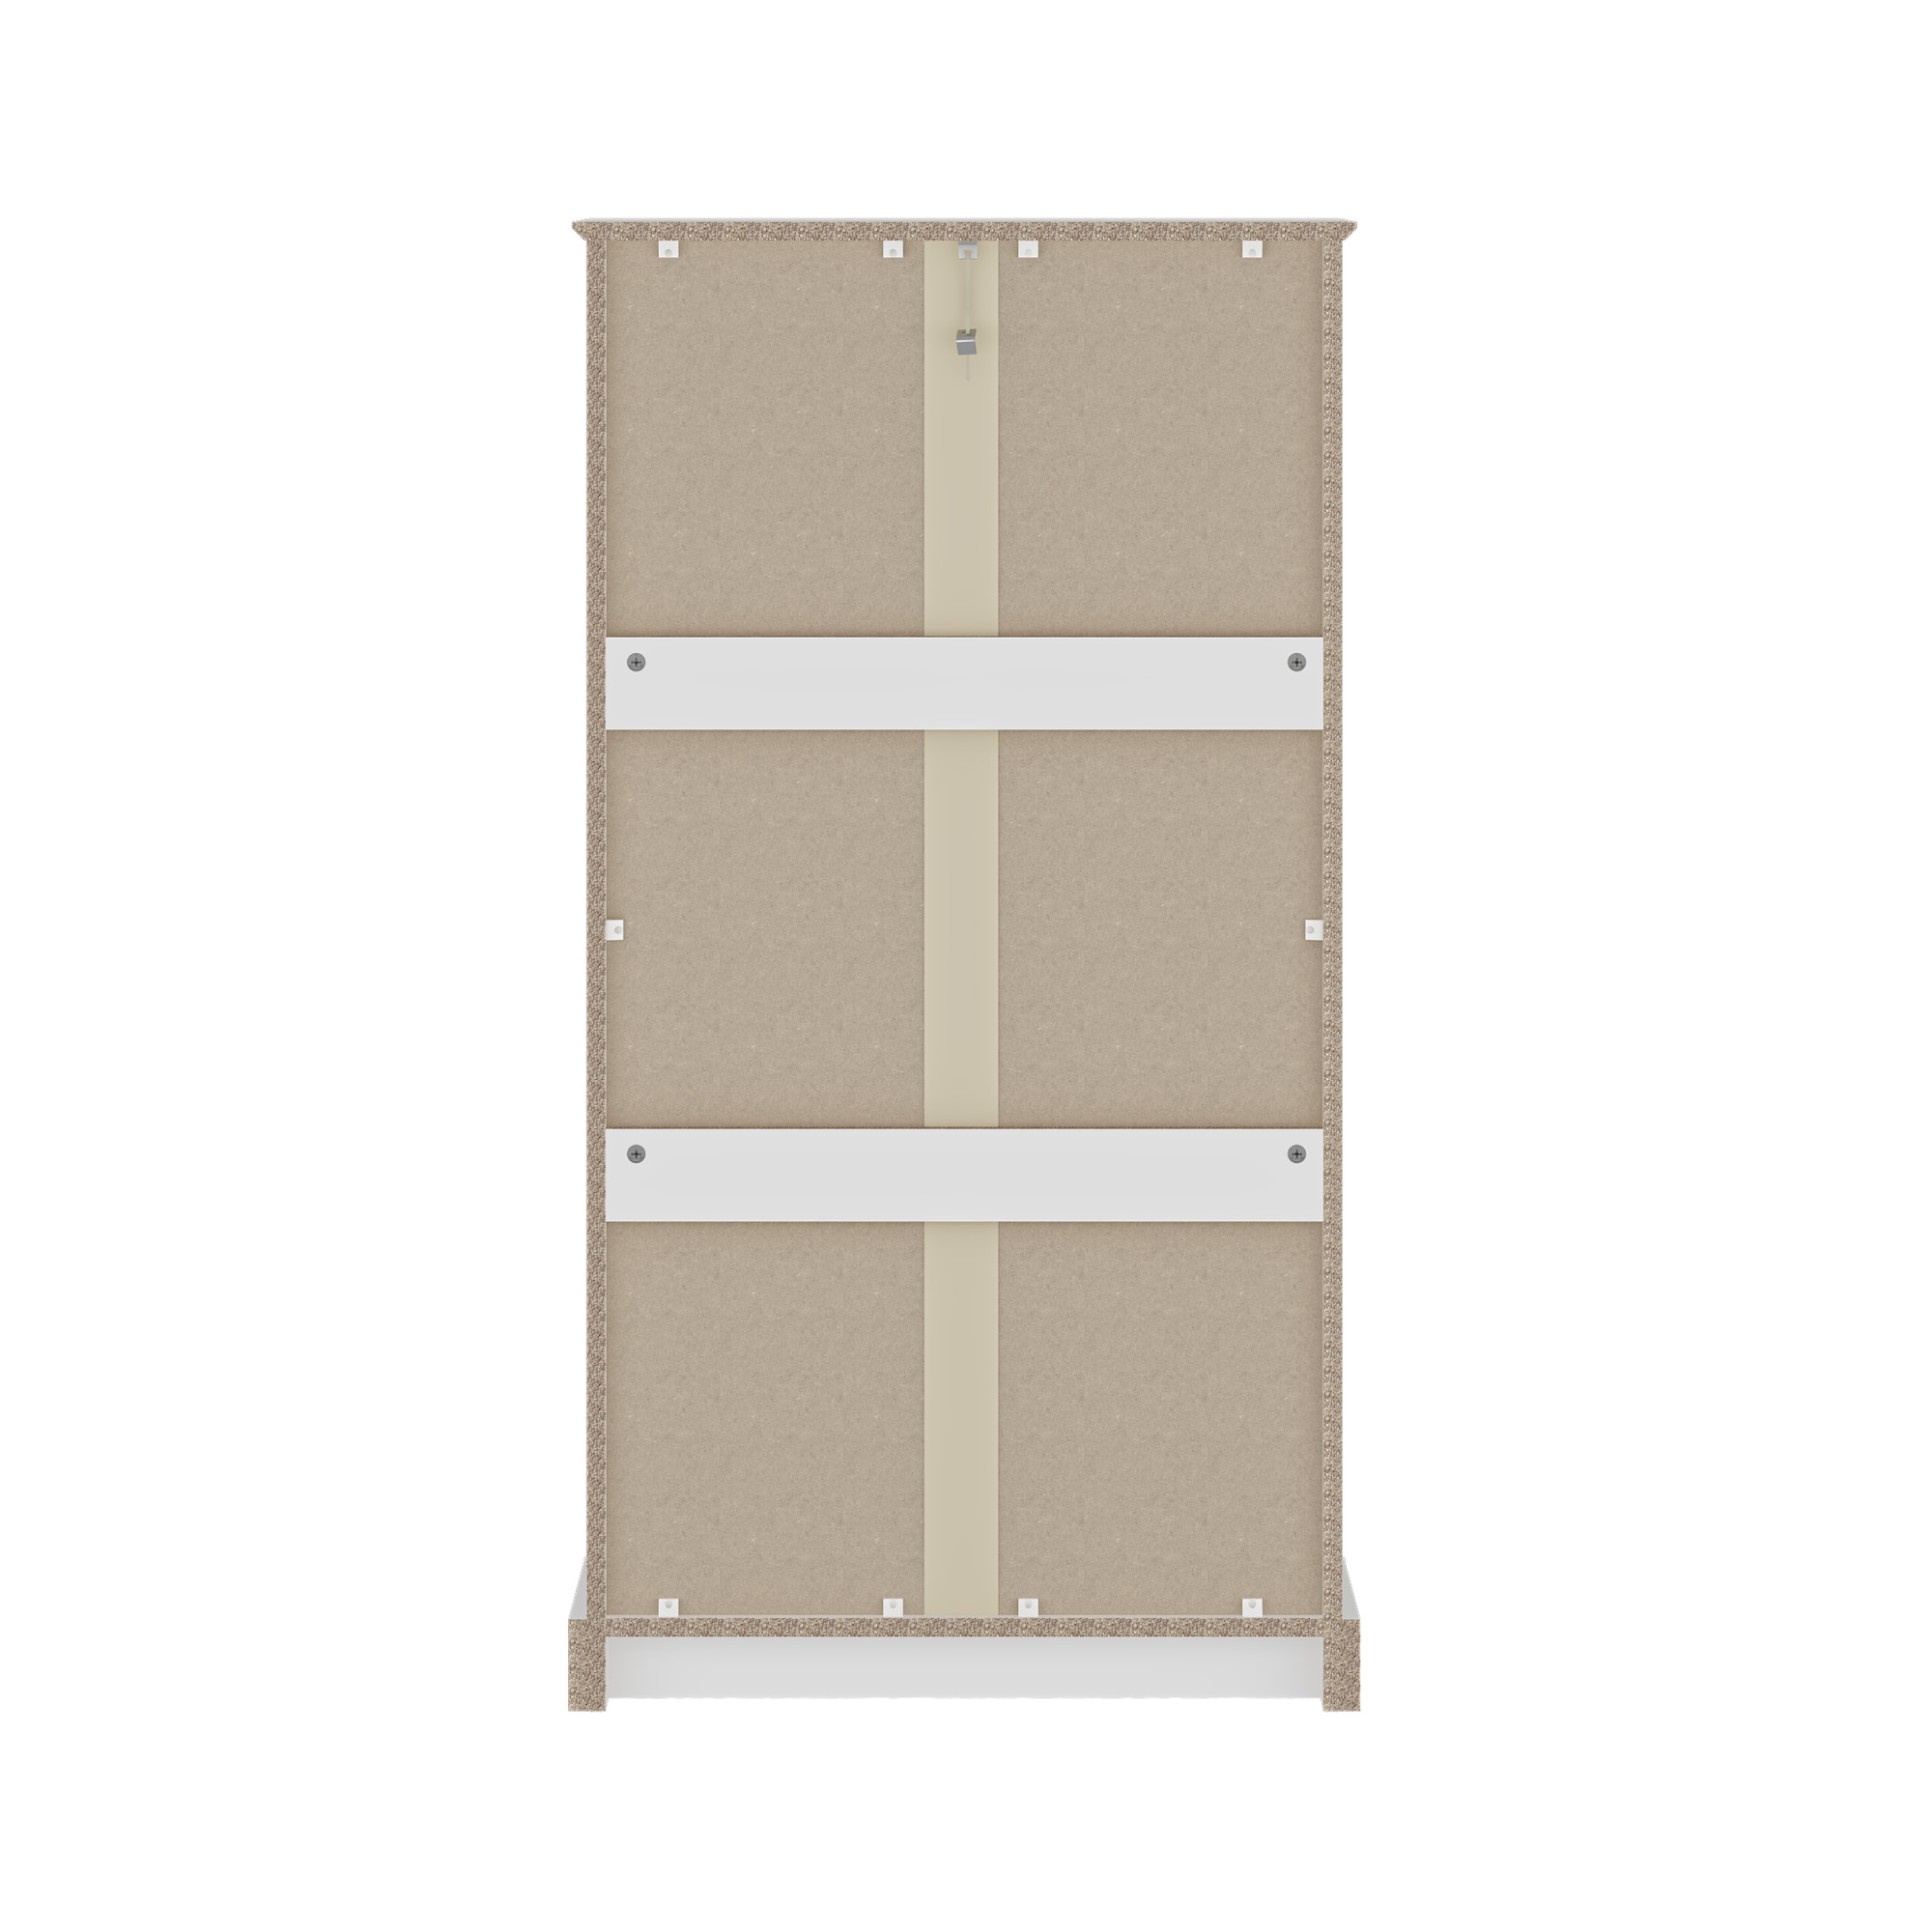 Hillsdale Campbell Wood 3 Shelf Kids Bookcase, White - image 4 of 11